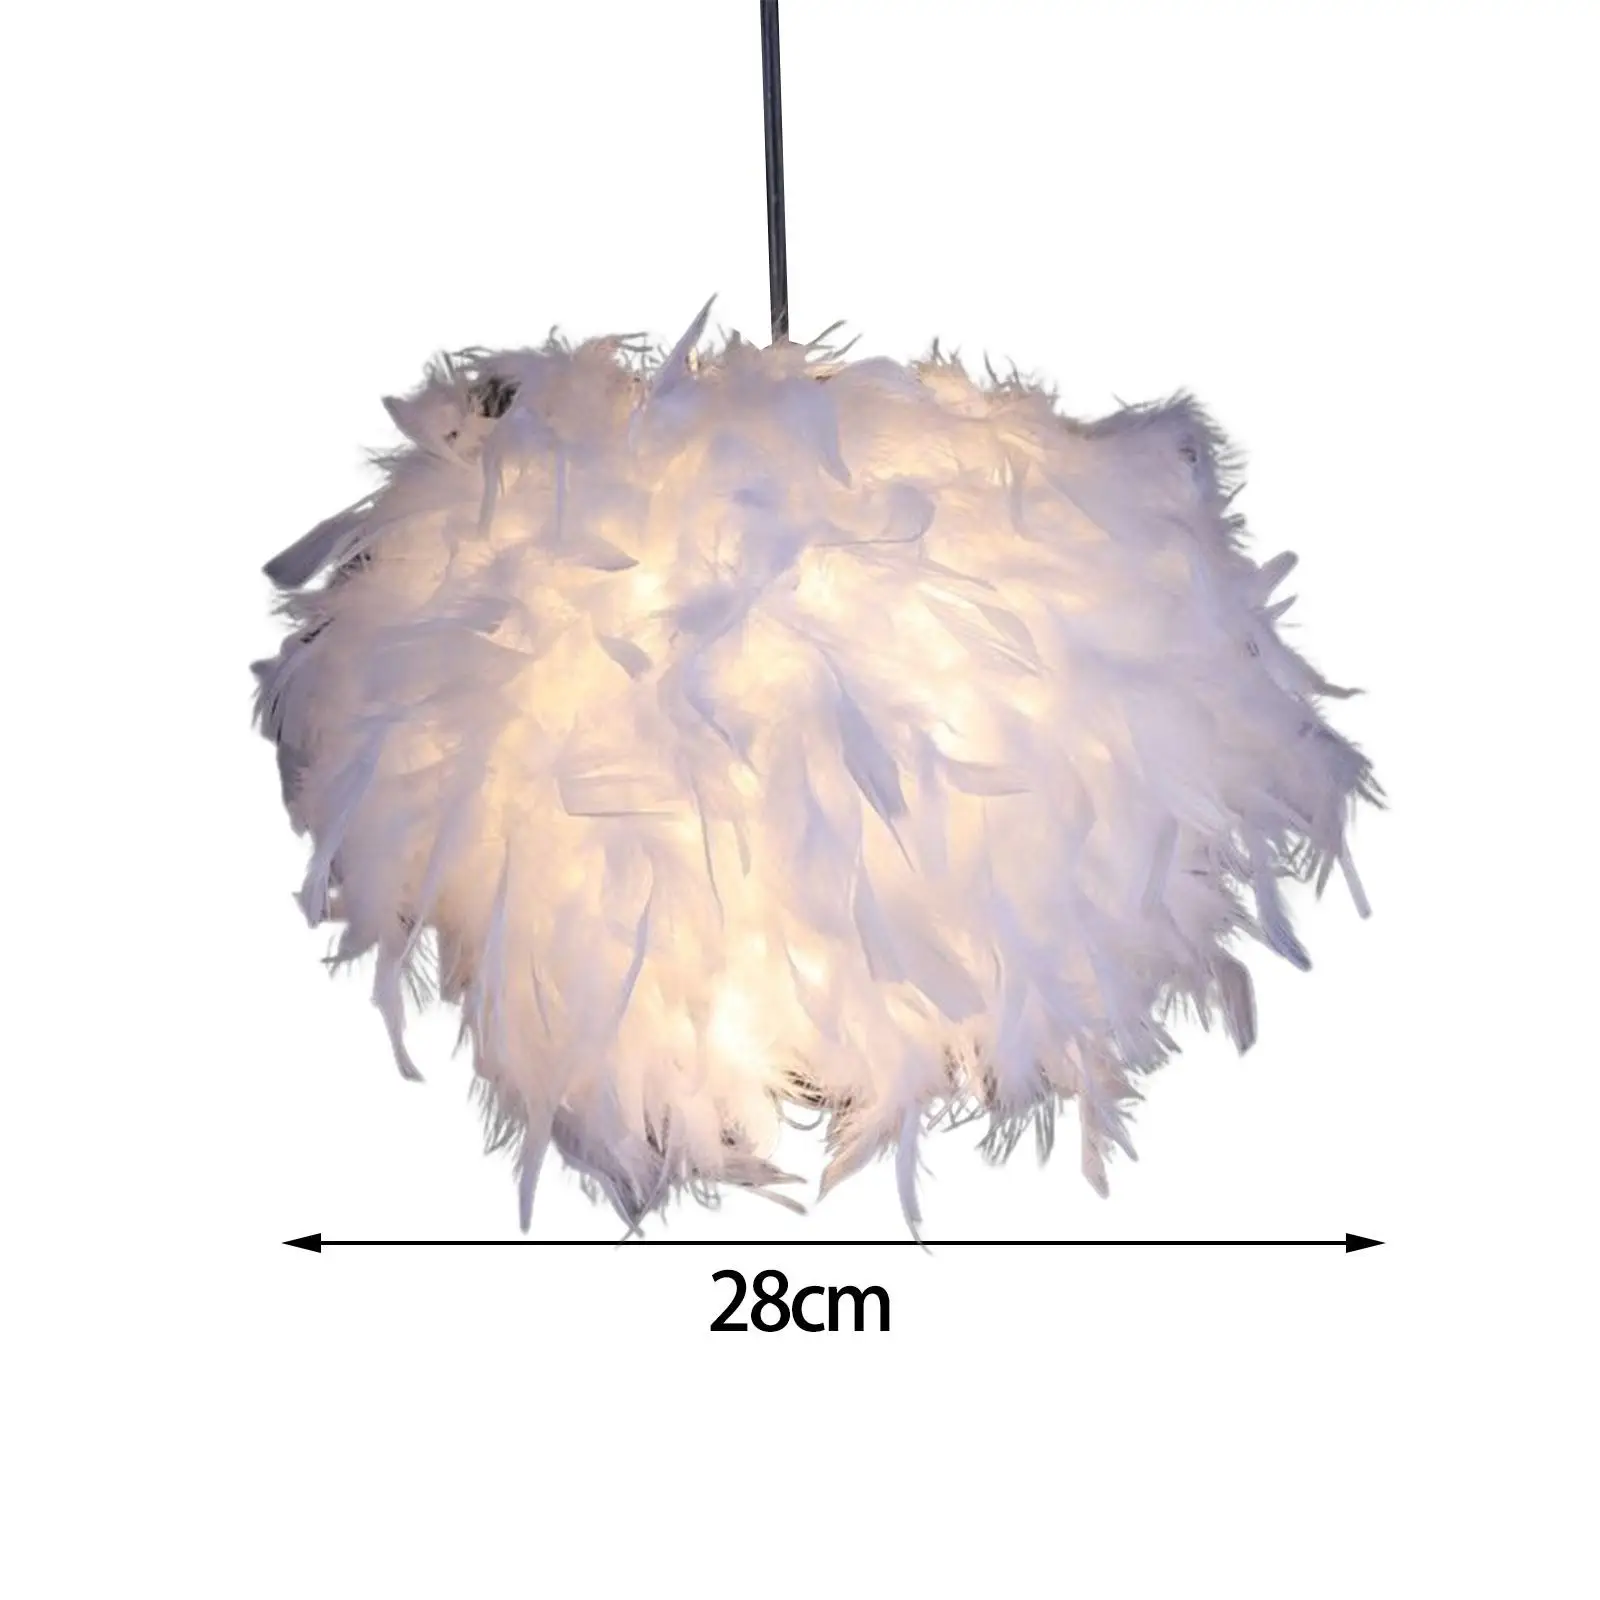 Minimalist Feather Lampshade for Desk Night Light Bedside Lamp Decoration